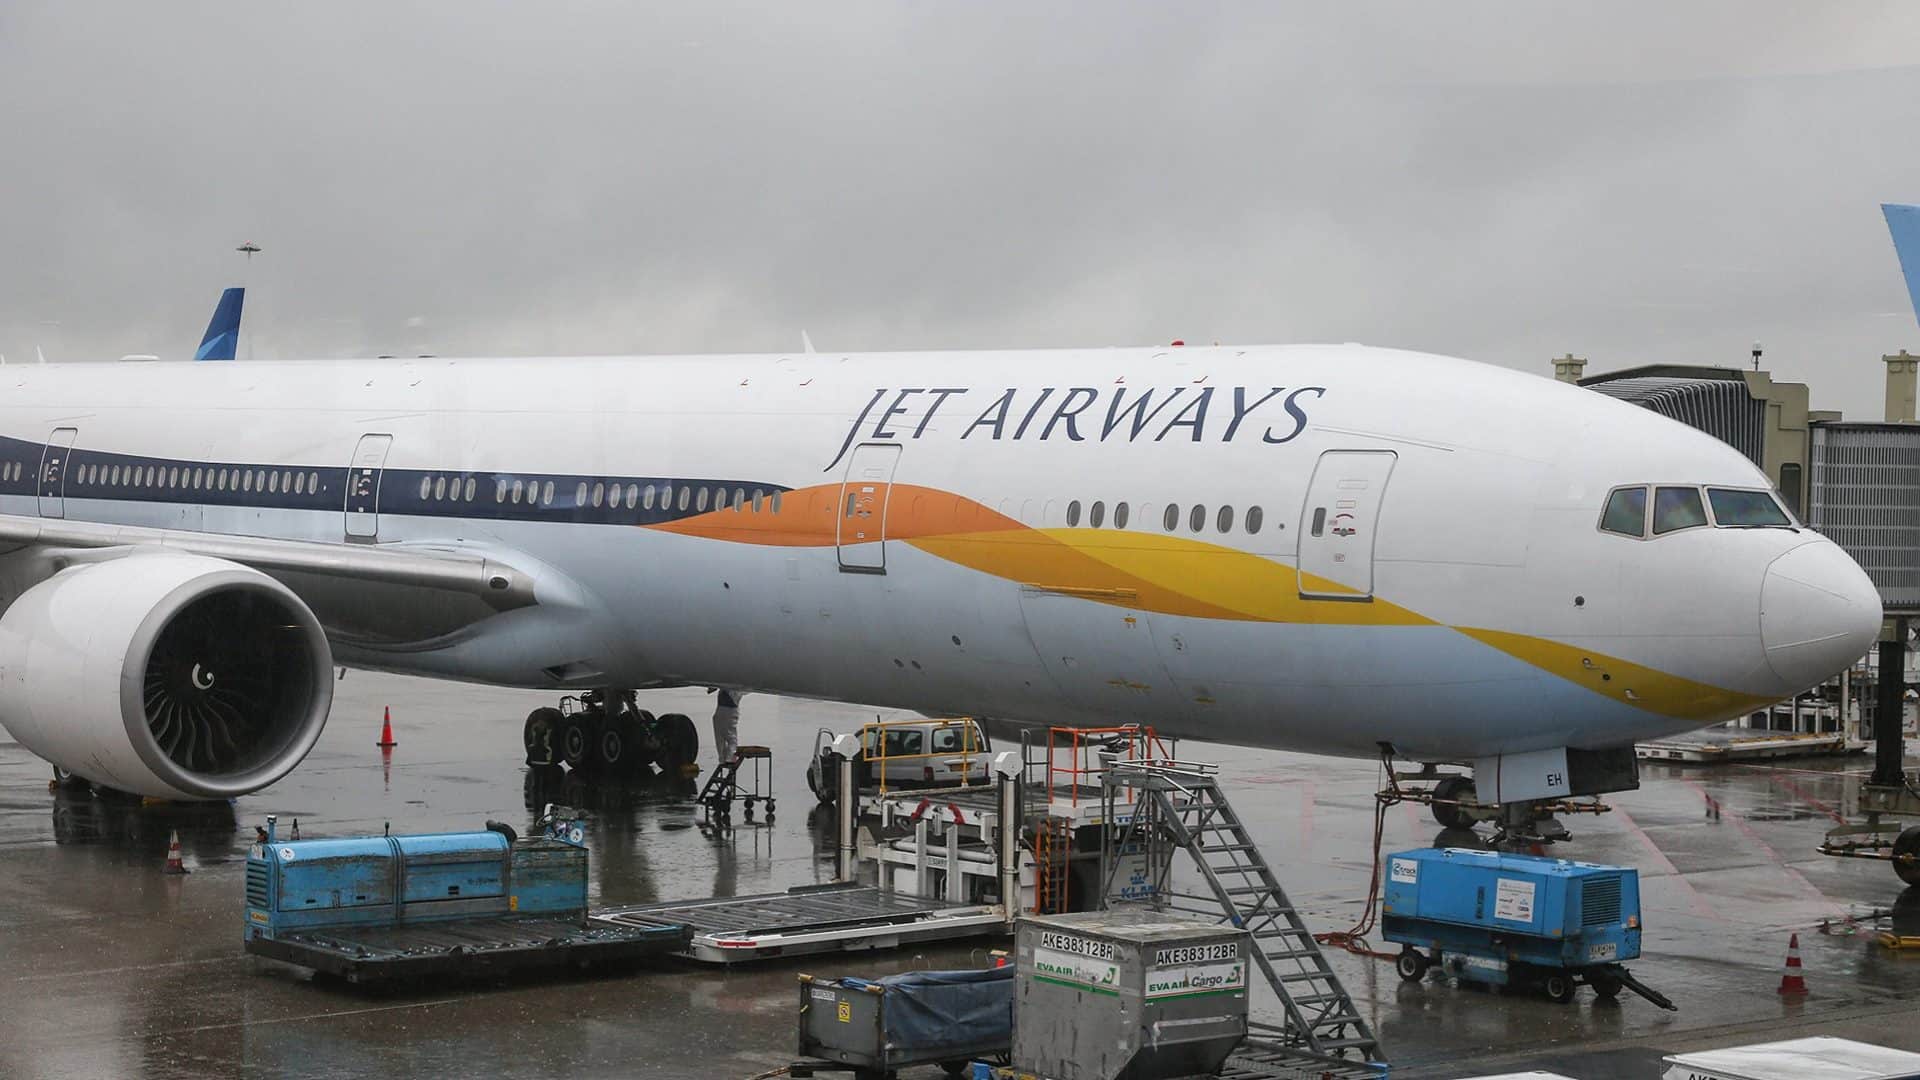 NCLT approves resolution plan for revival of Jet Airways